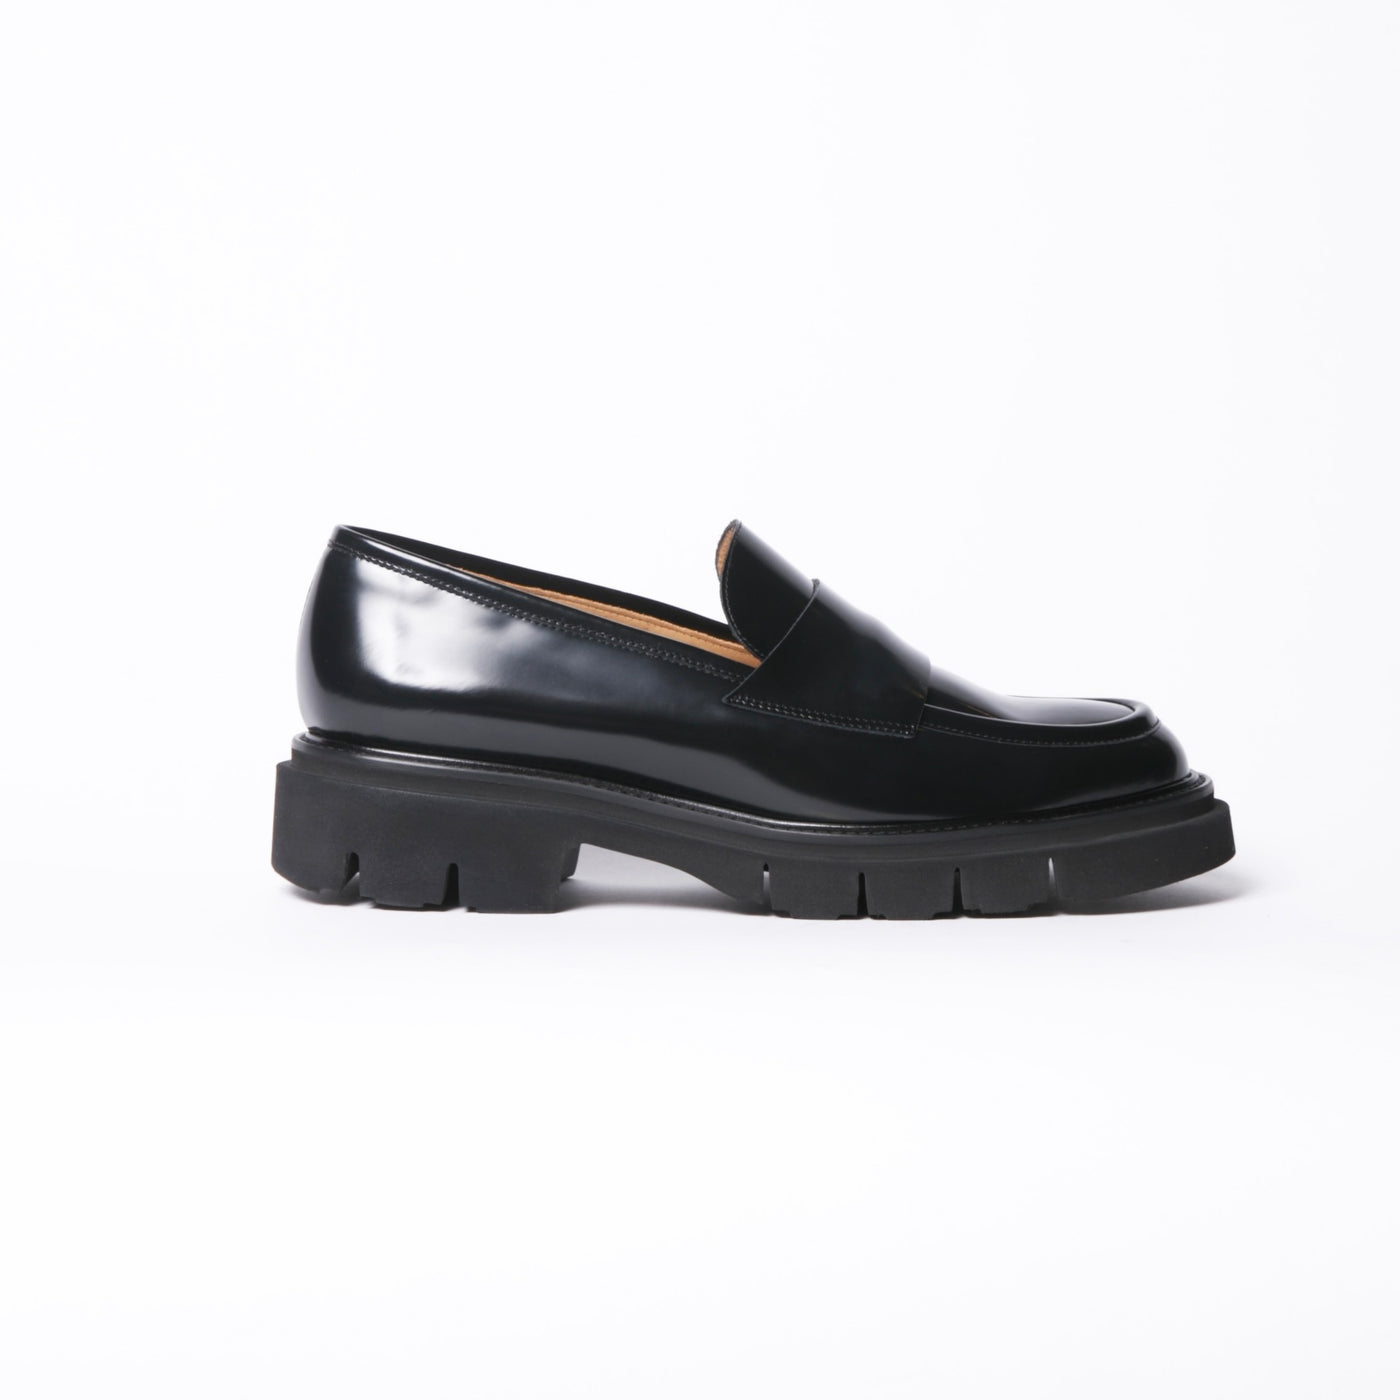 Chunky black patent leather loafers with light rubber soles. 